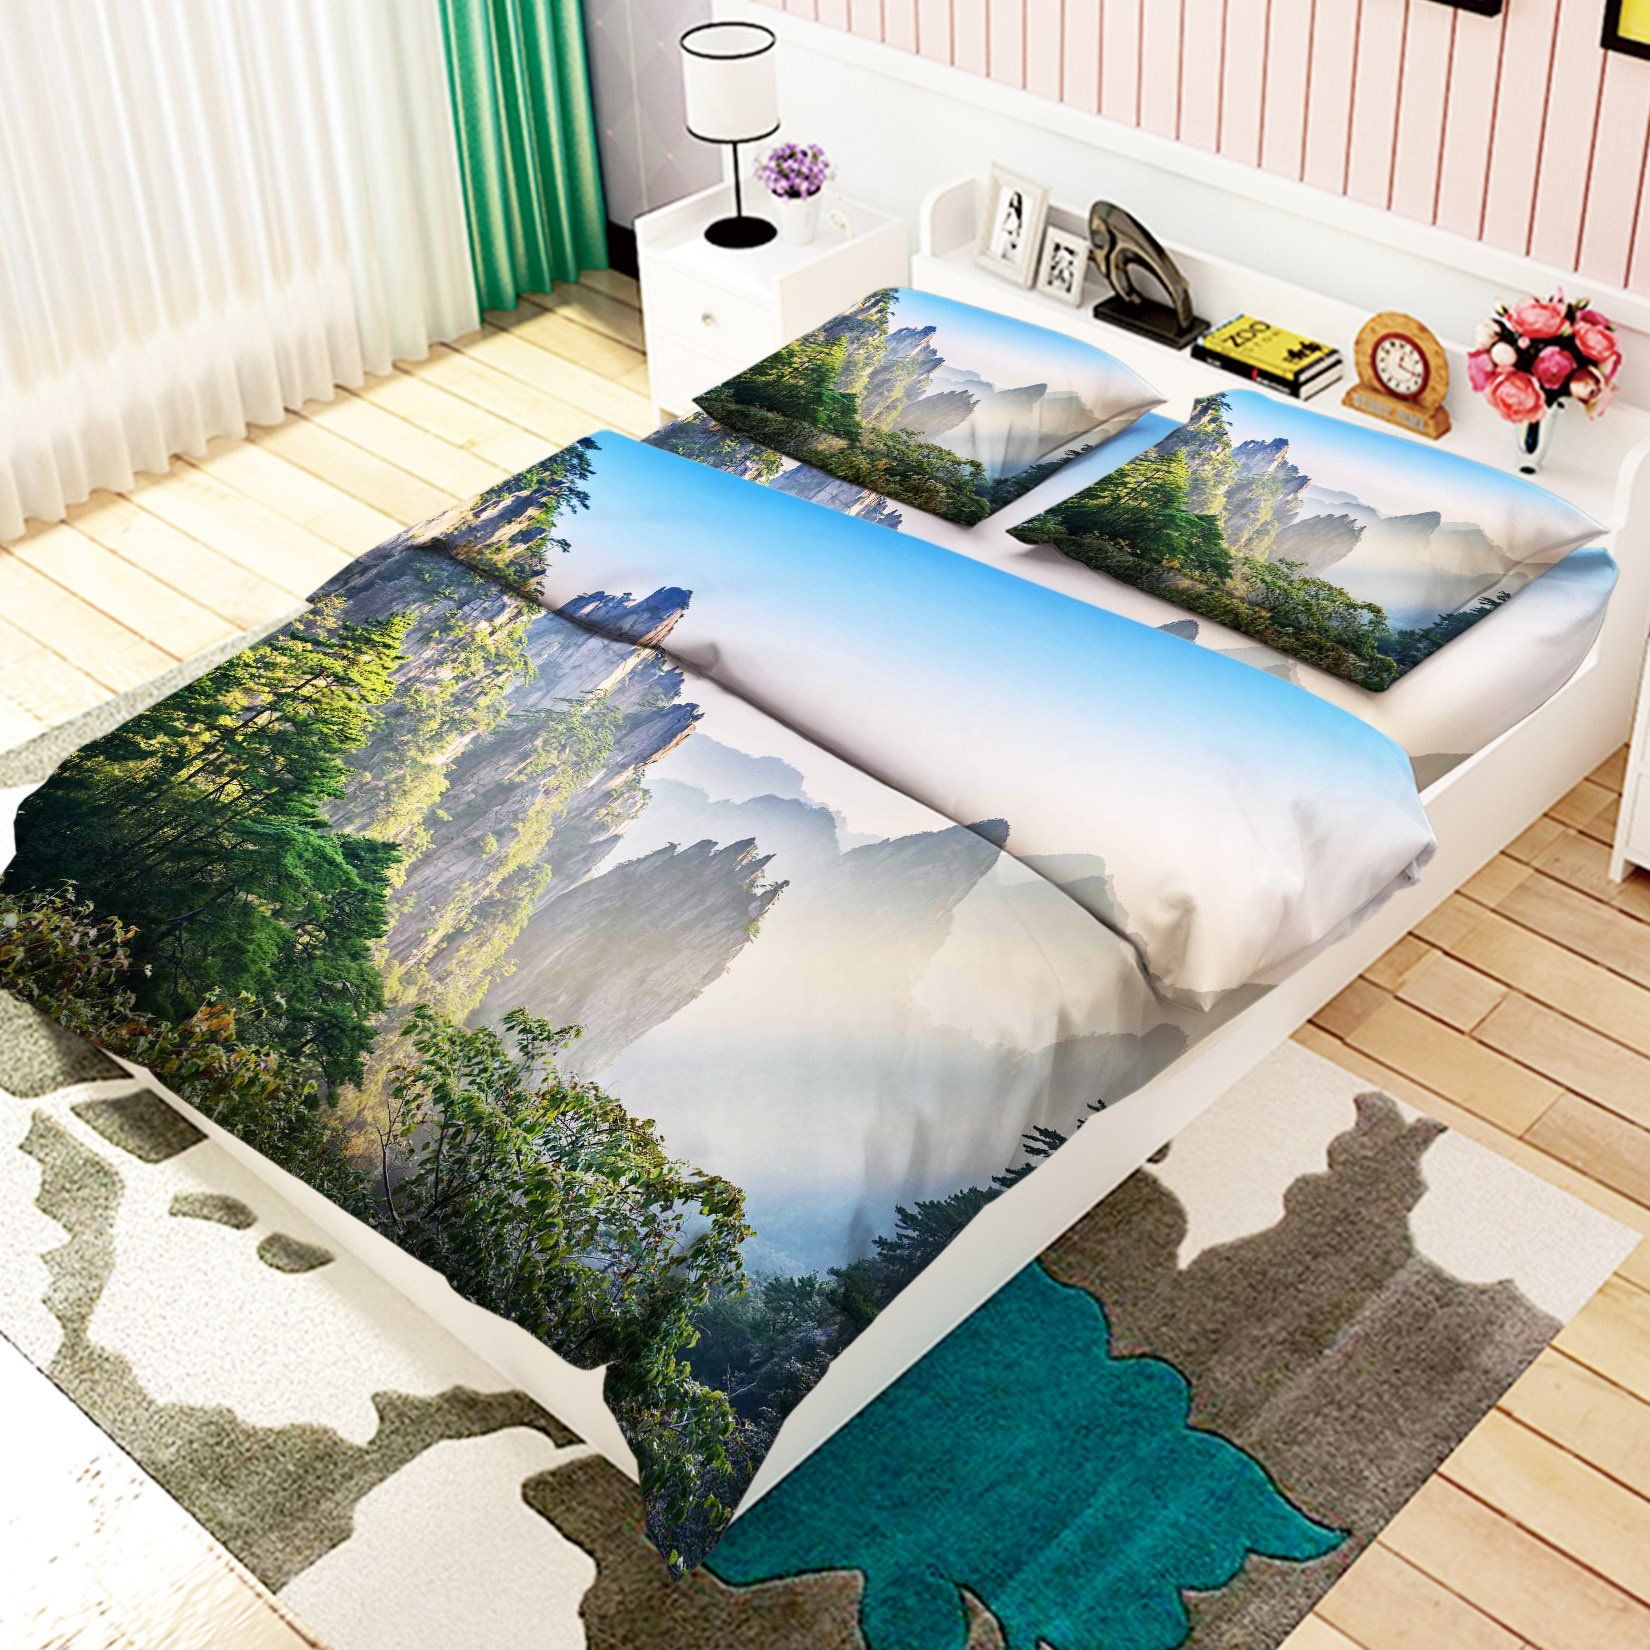 3D Misty Mountains Scenery 54 Bed Pillowcases Quilt Wallpaper AJ Wallpaper 